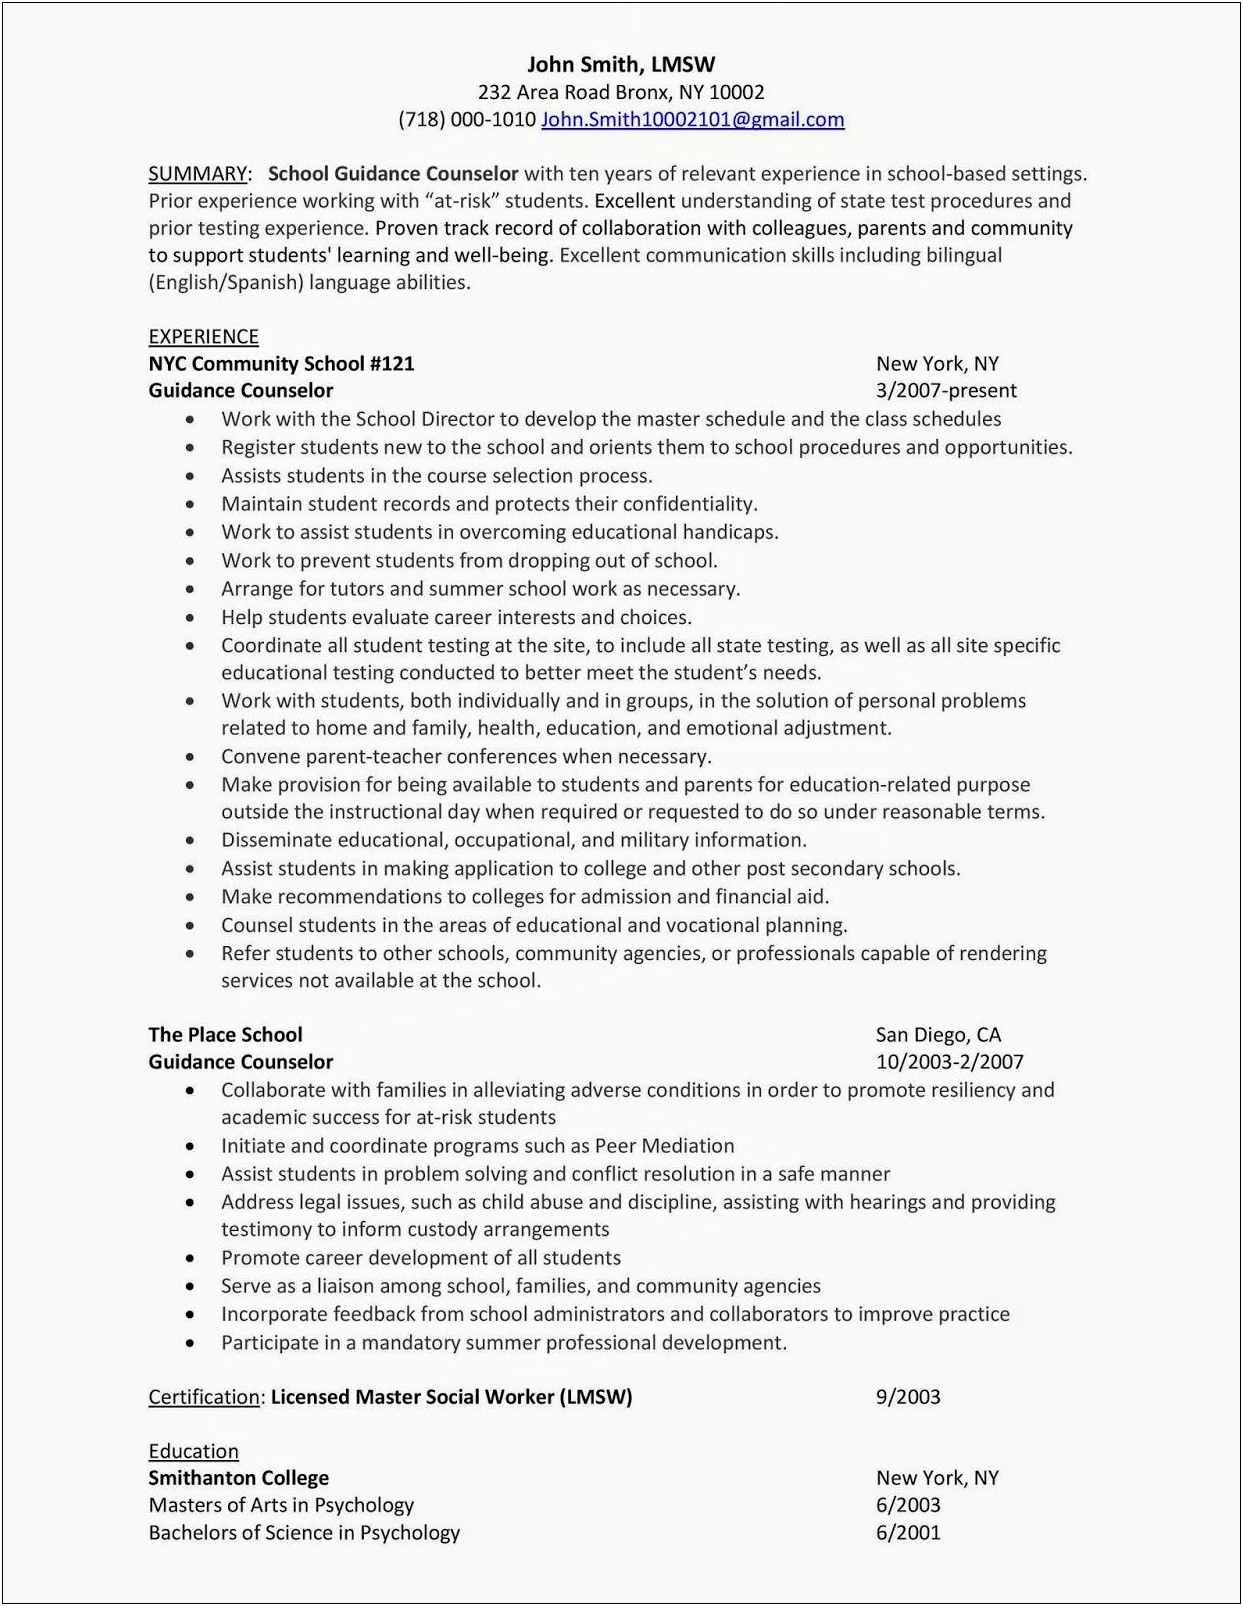 Sample Resume With Skills Licenses And Education